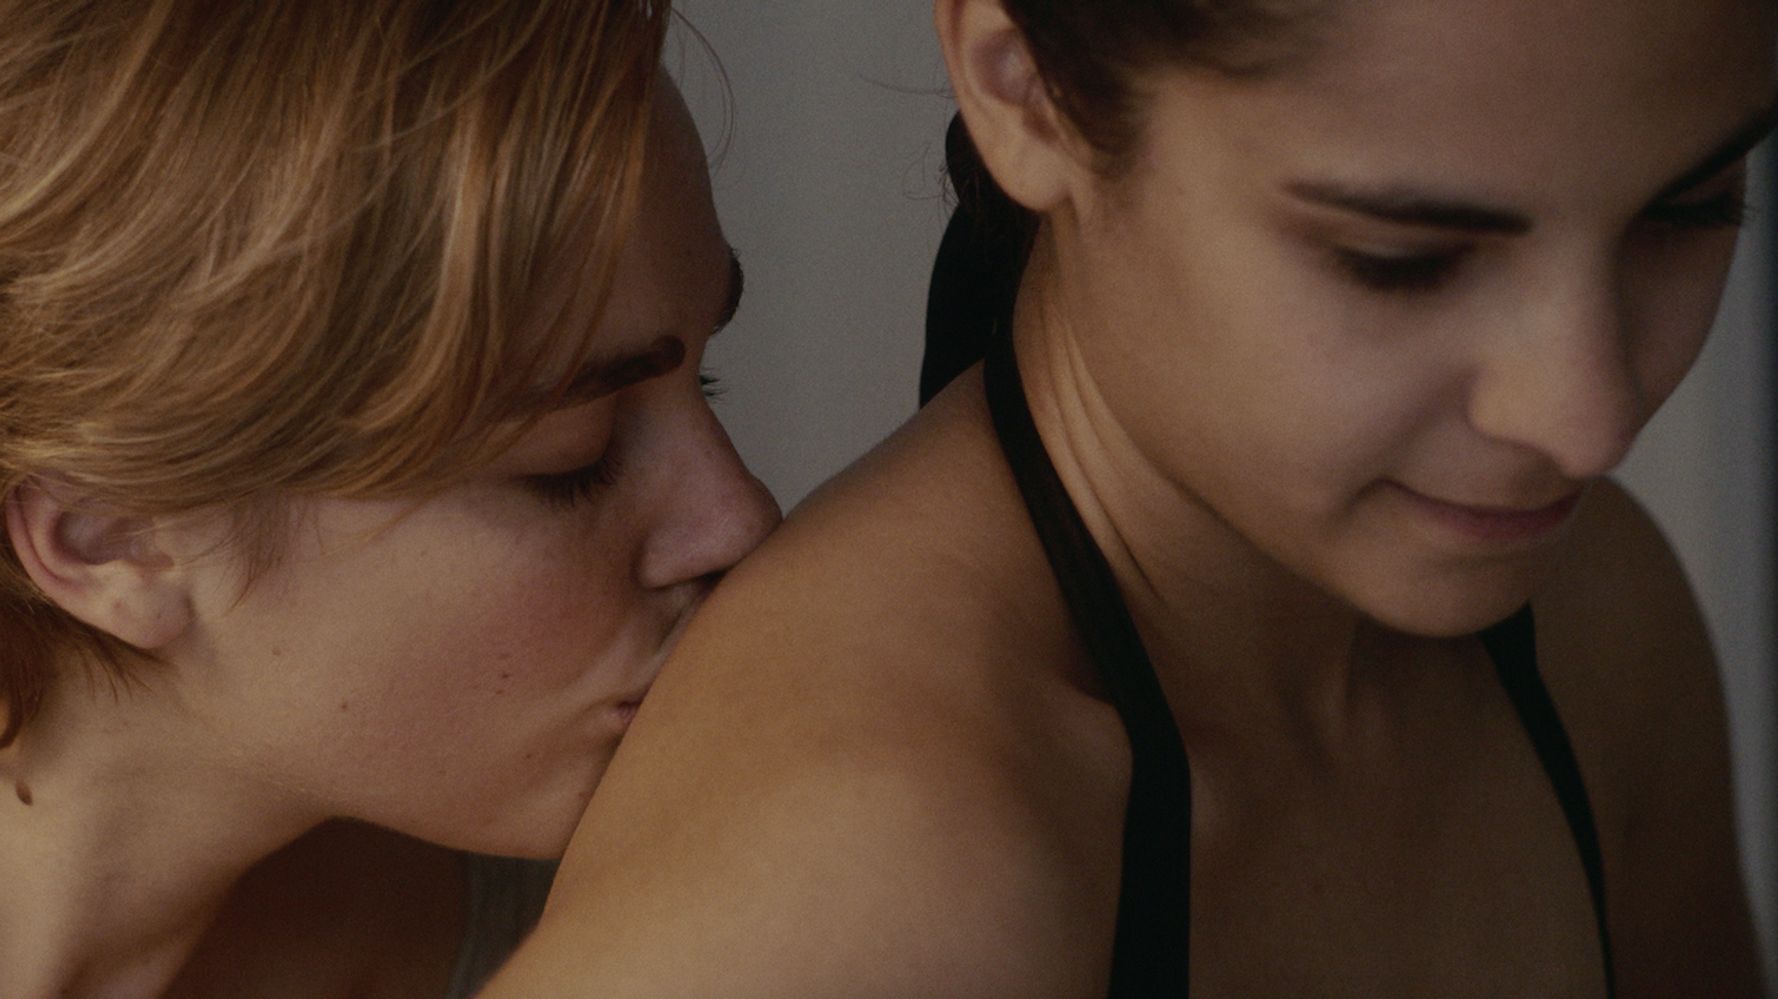 Queer Film Explores Long-Term Relationships In The Age Of The Single 